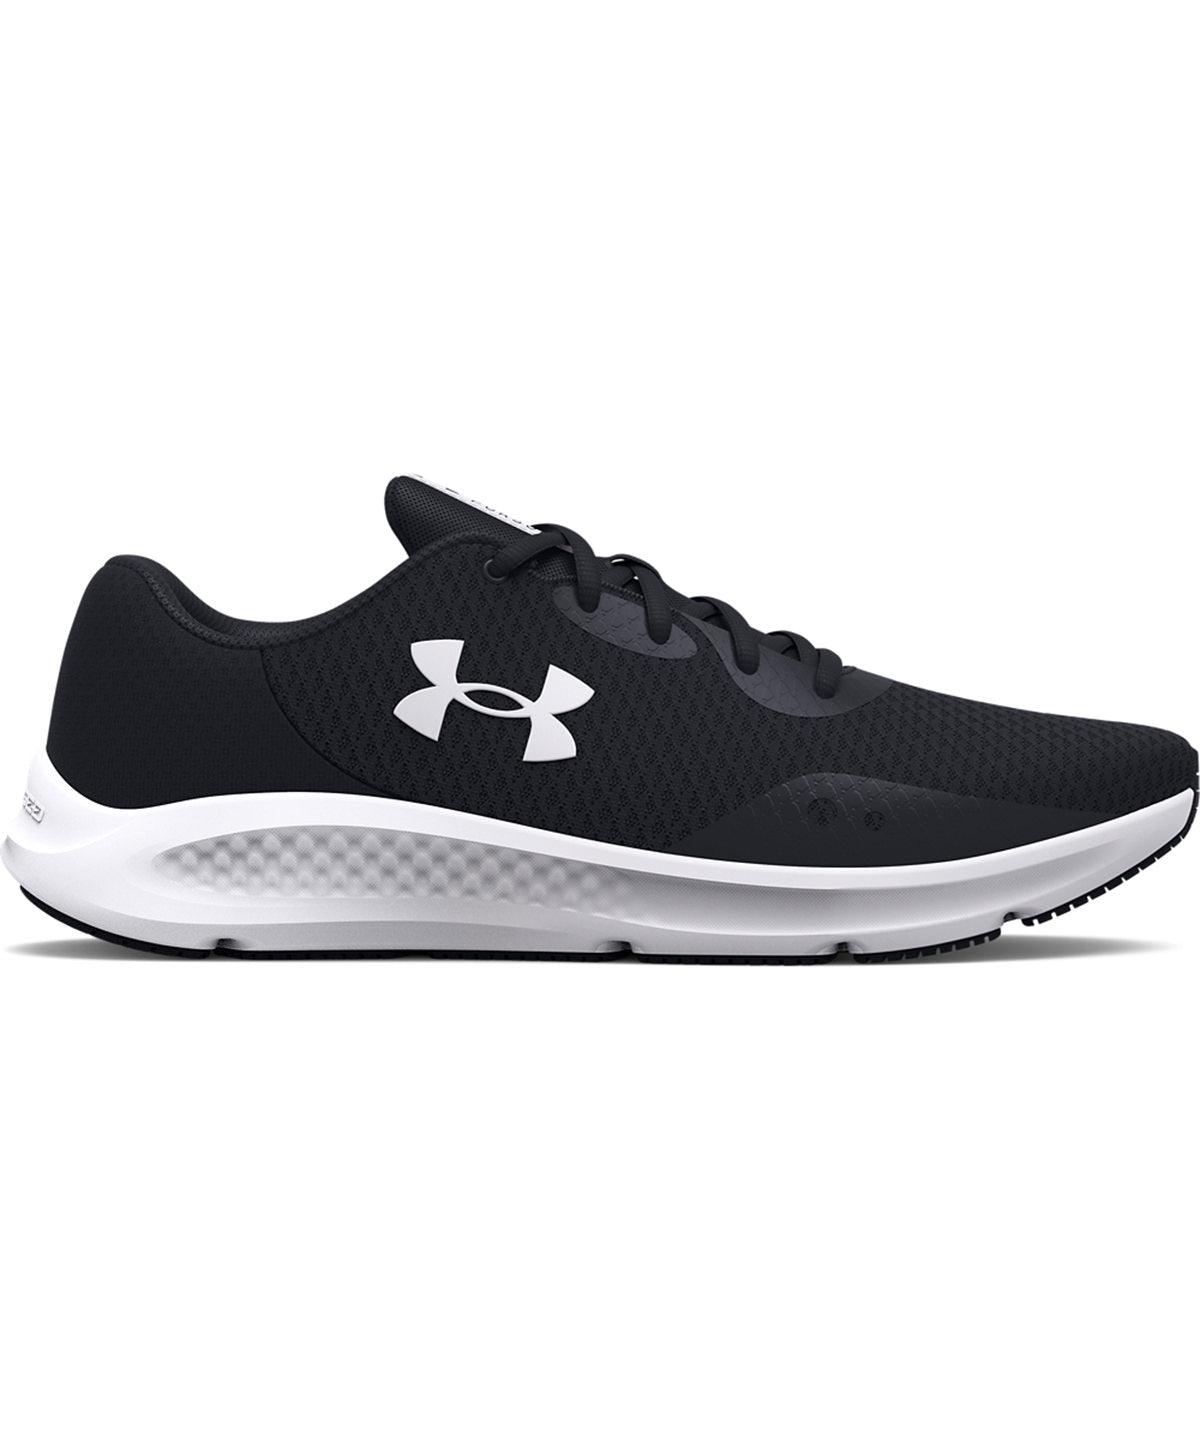 Black/Black/White - UA women's charged pursuit 3 trainers Trainers Under Armour Back to the Gym, Exclusives, Footwear, Gymwear, New in, New Styles For 2022 Schoolwear Centres